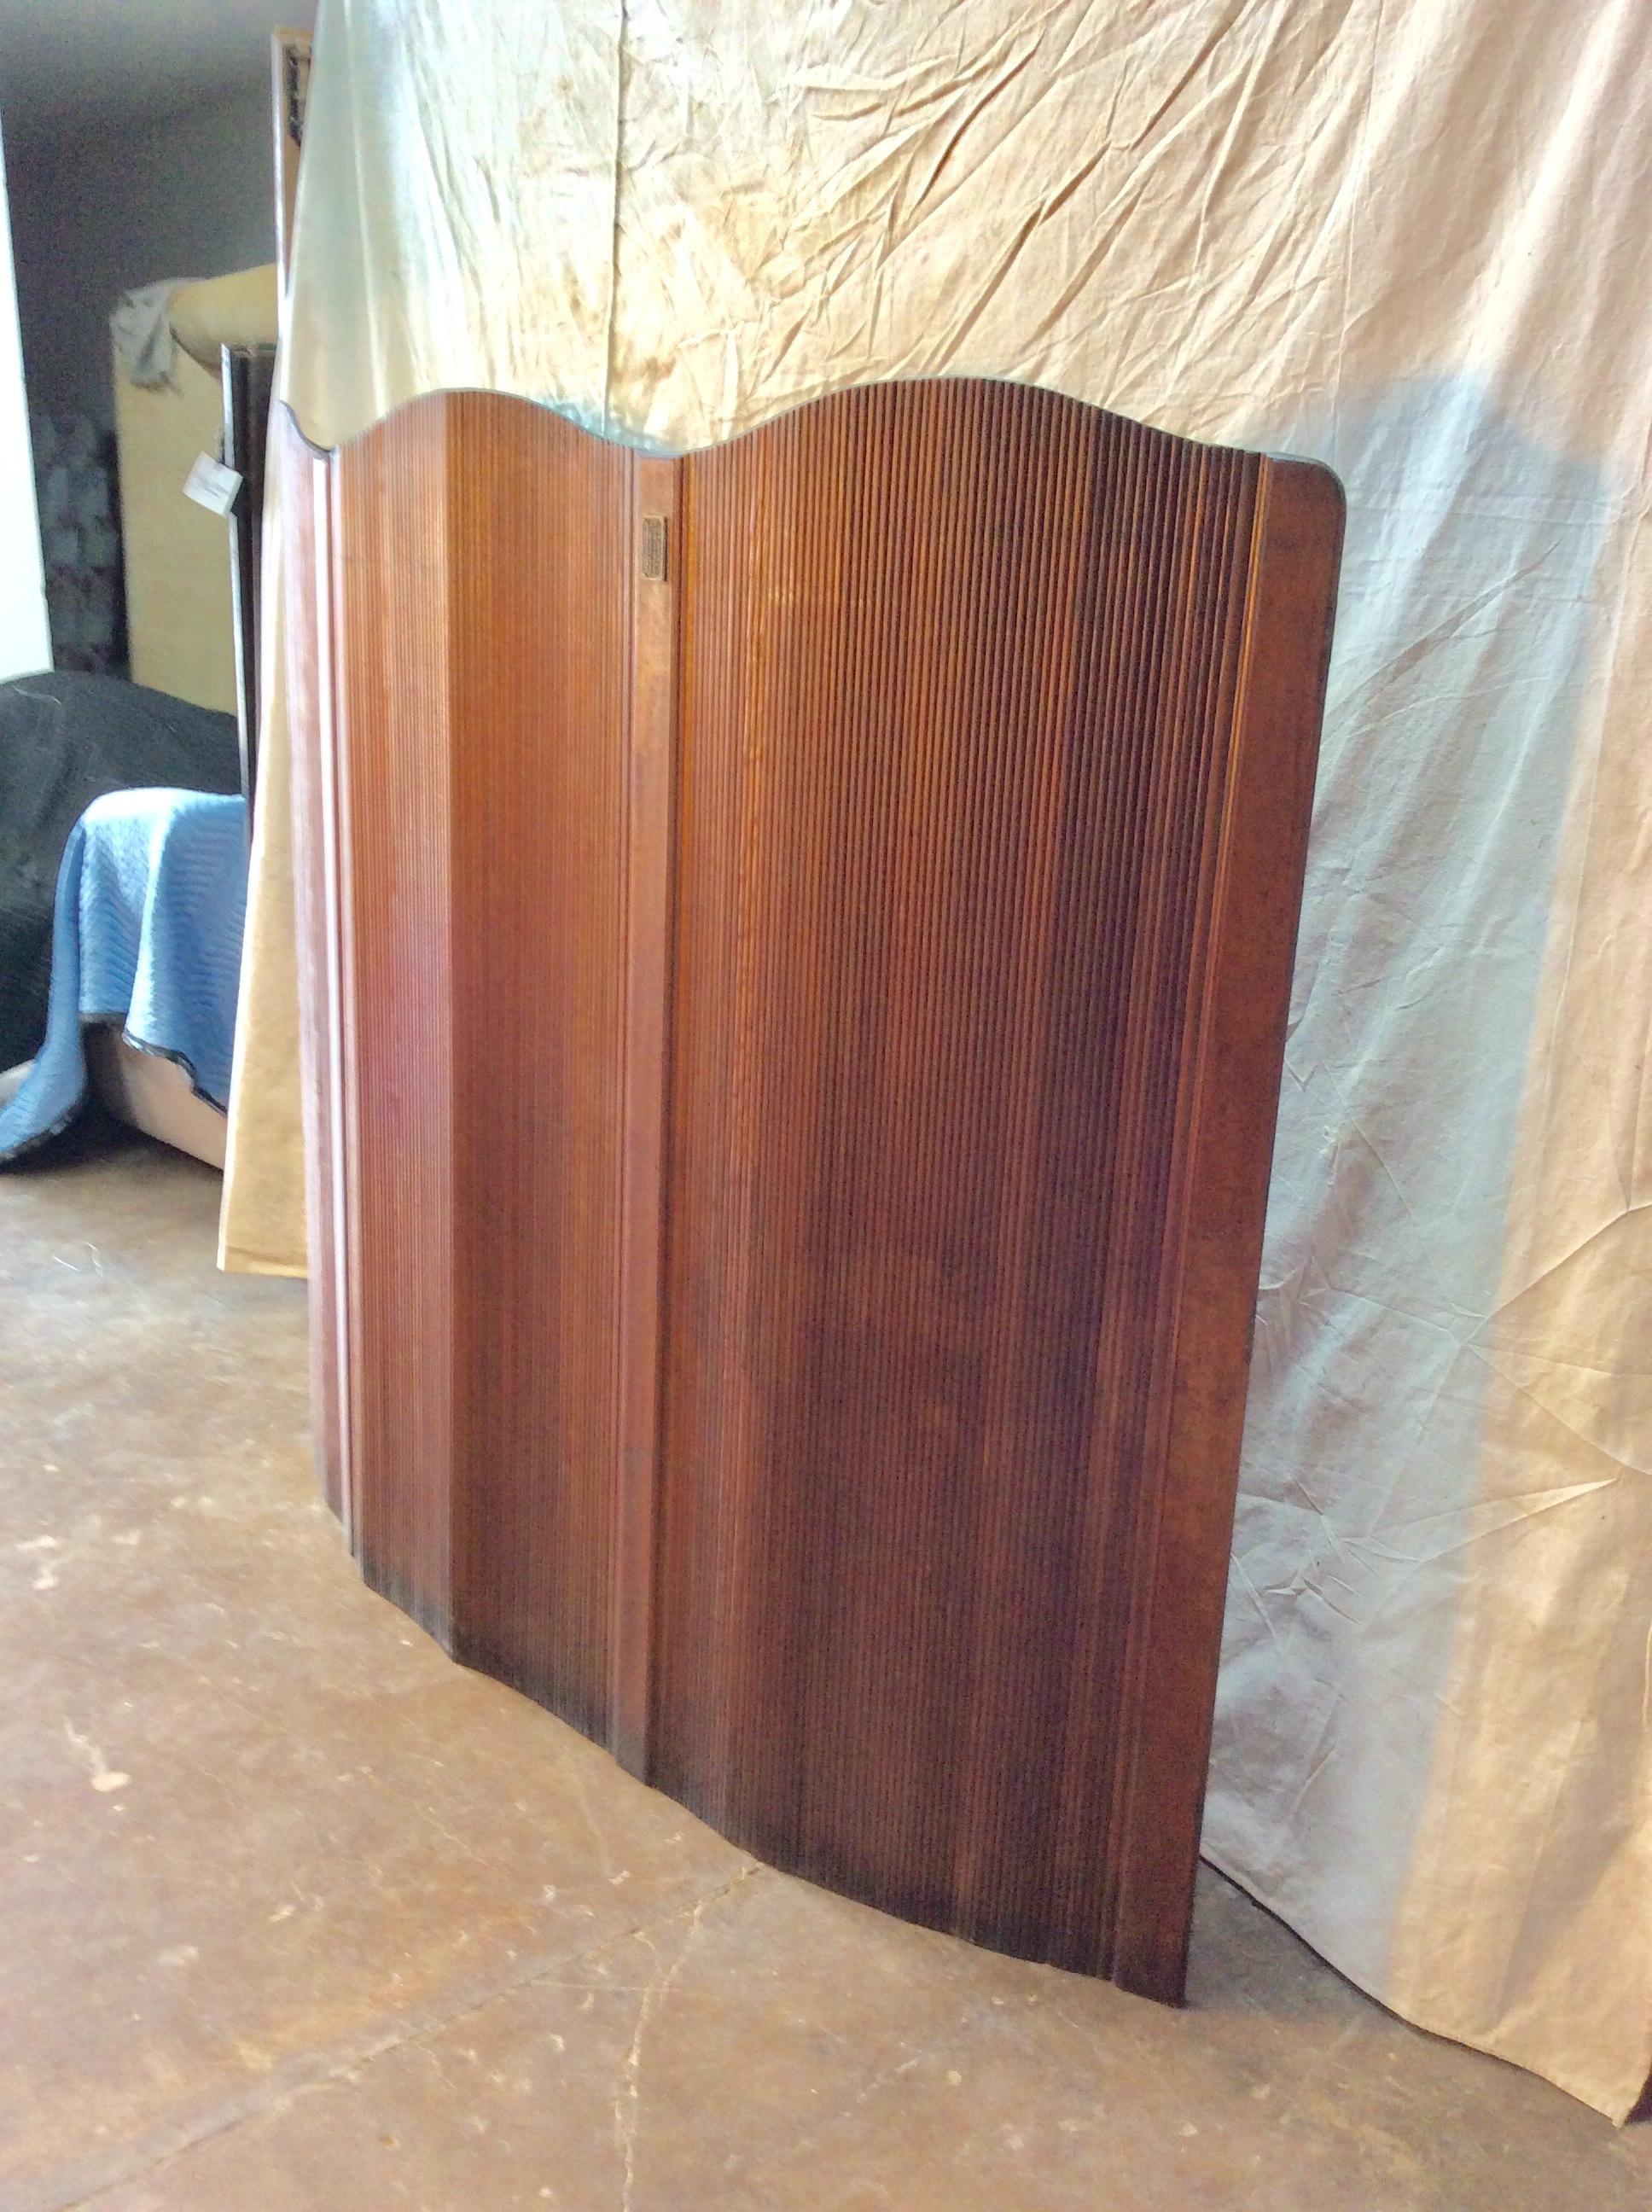 Found in France, this French Art Deco freestanding room divider / folding screen in patinated pine was made by A. Poirel & Ch. Pignolet of Nancy, France. This flexible paravent is made out of strips of wood allowing the screen to stand freely,